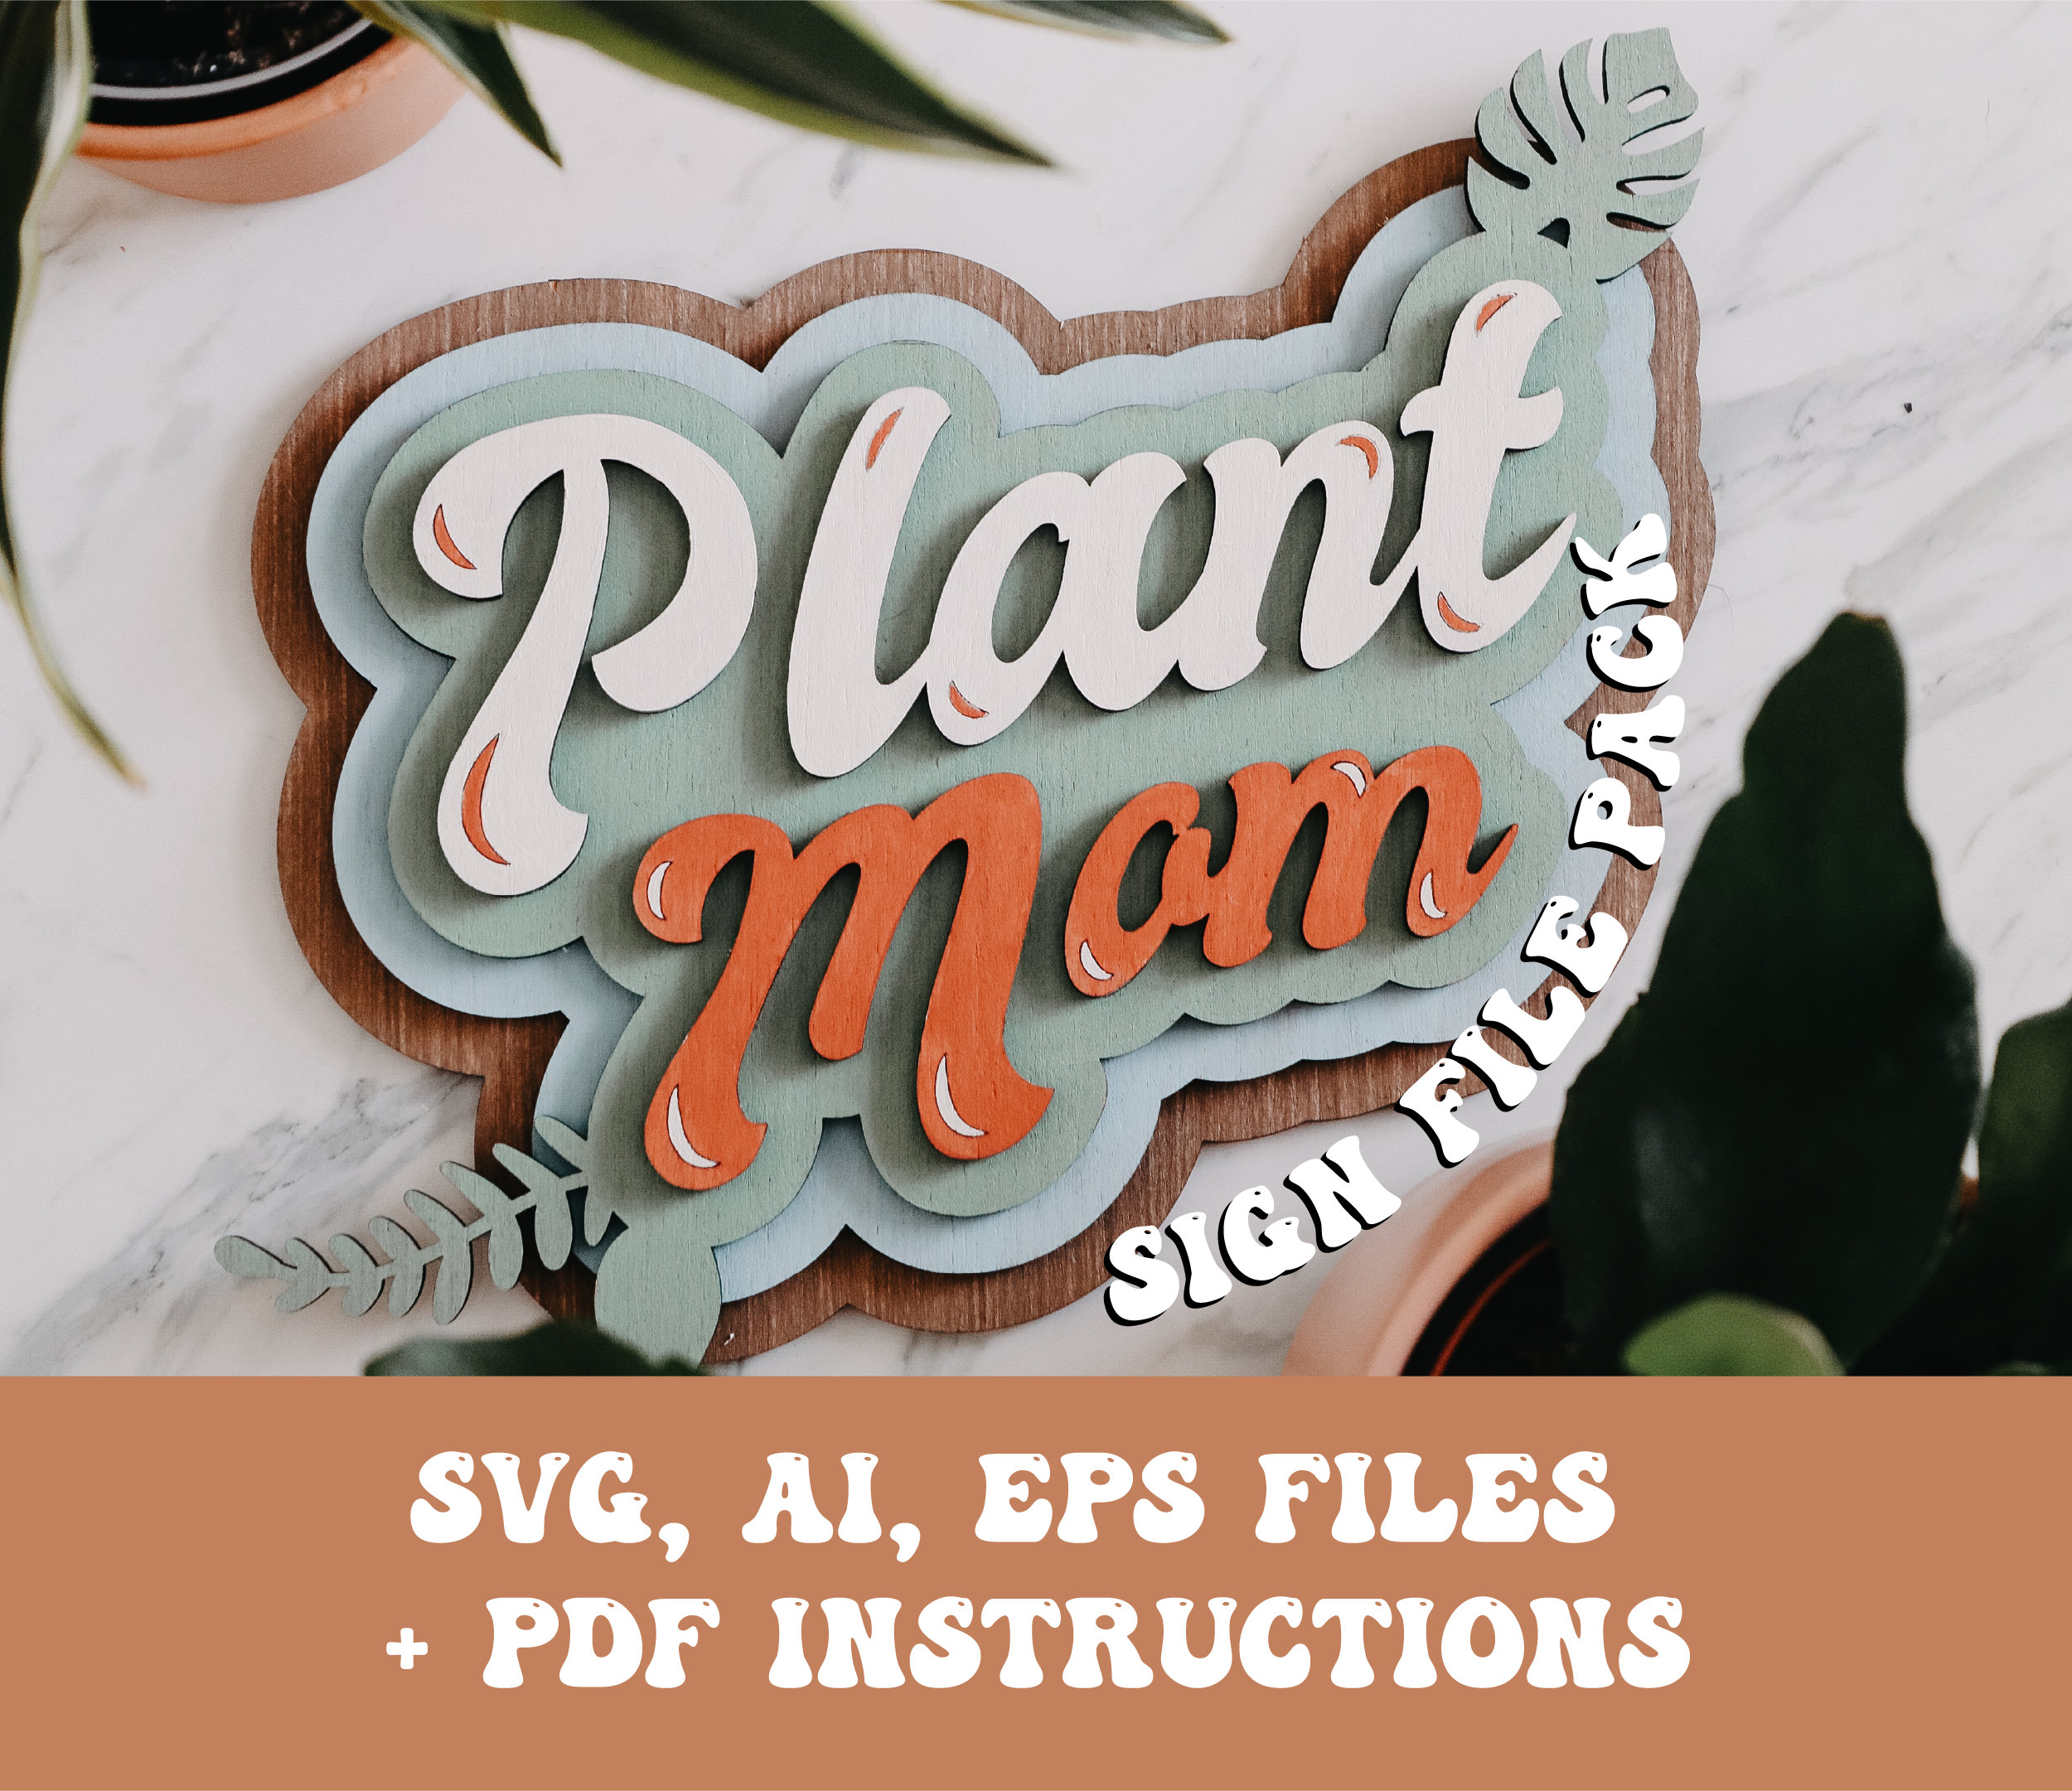 Download Plant Mom Sign Svg Eps Ai Files Glowforge SVG Files | Etsy